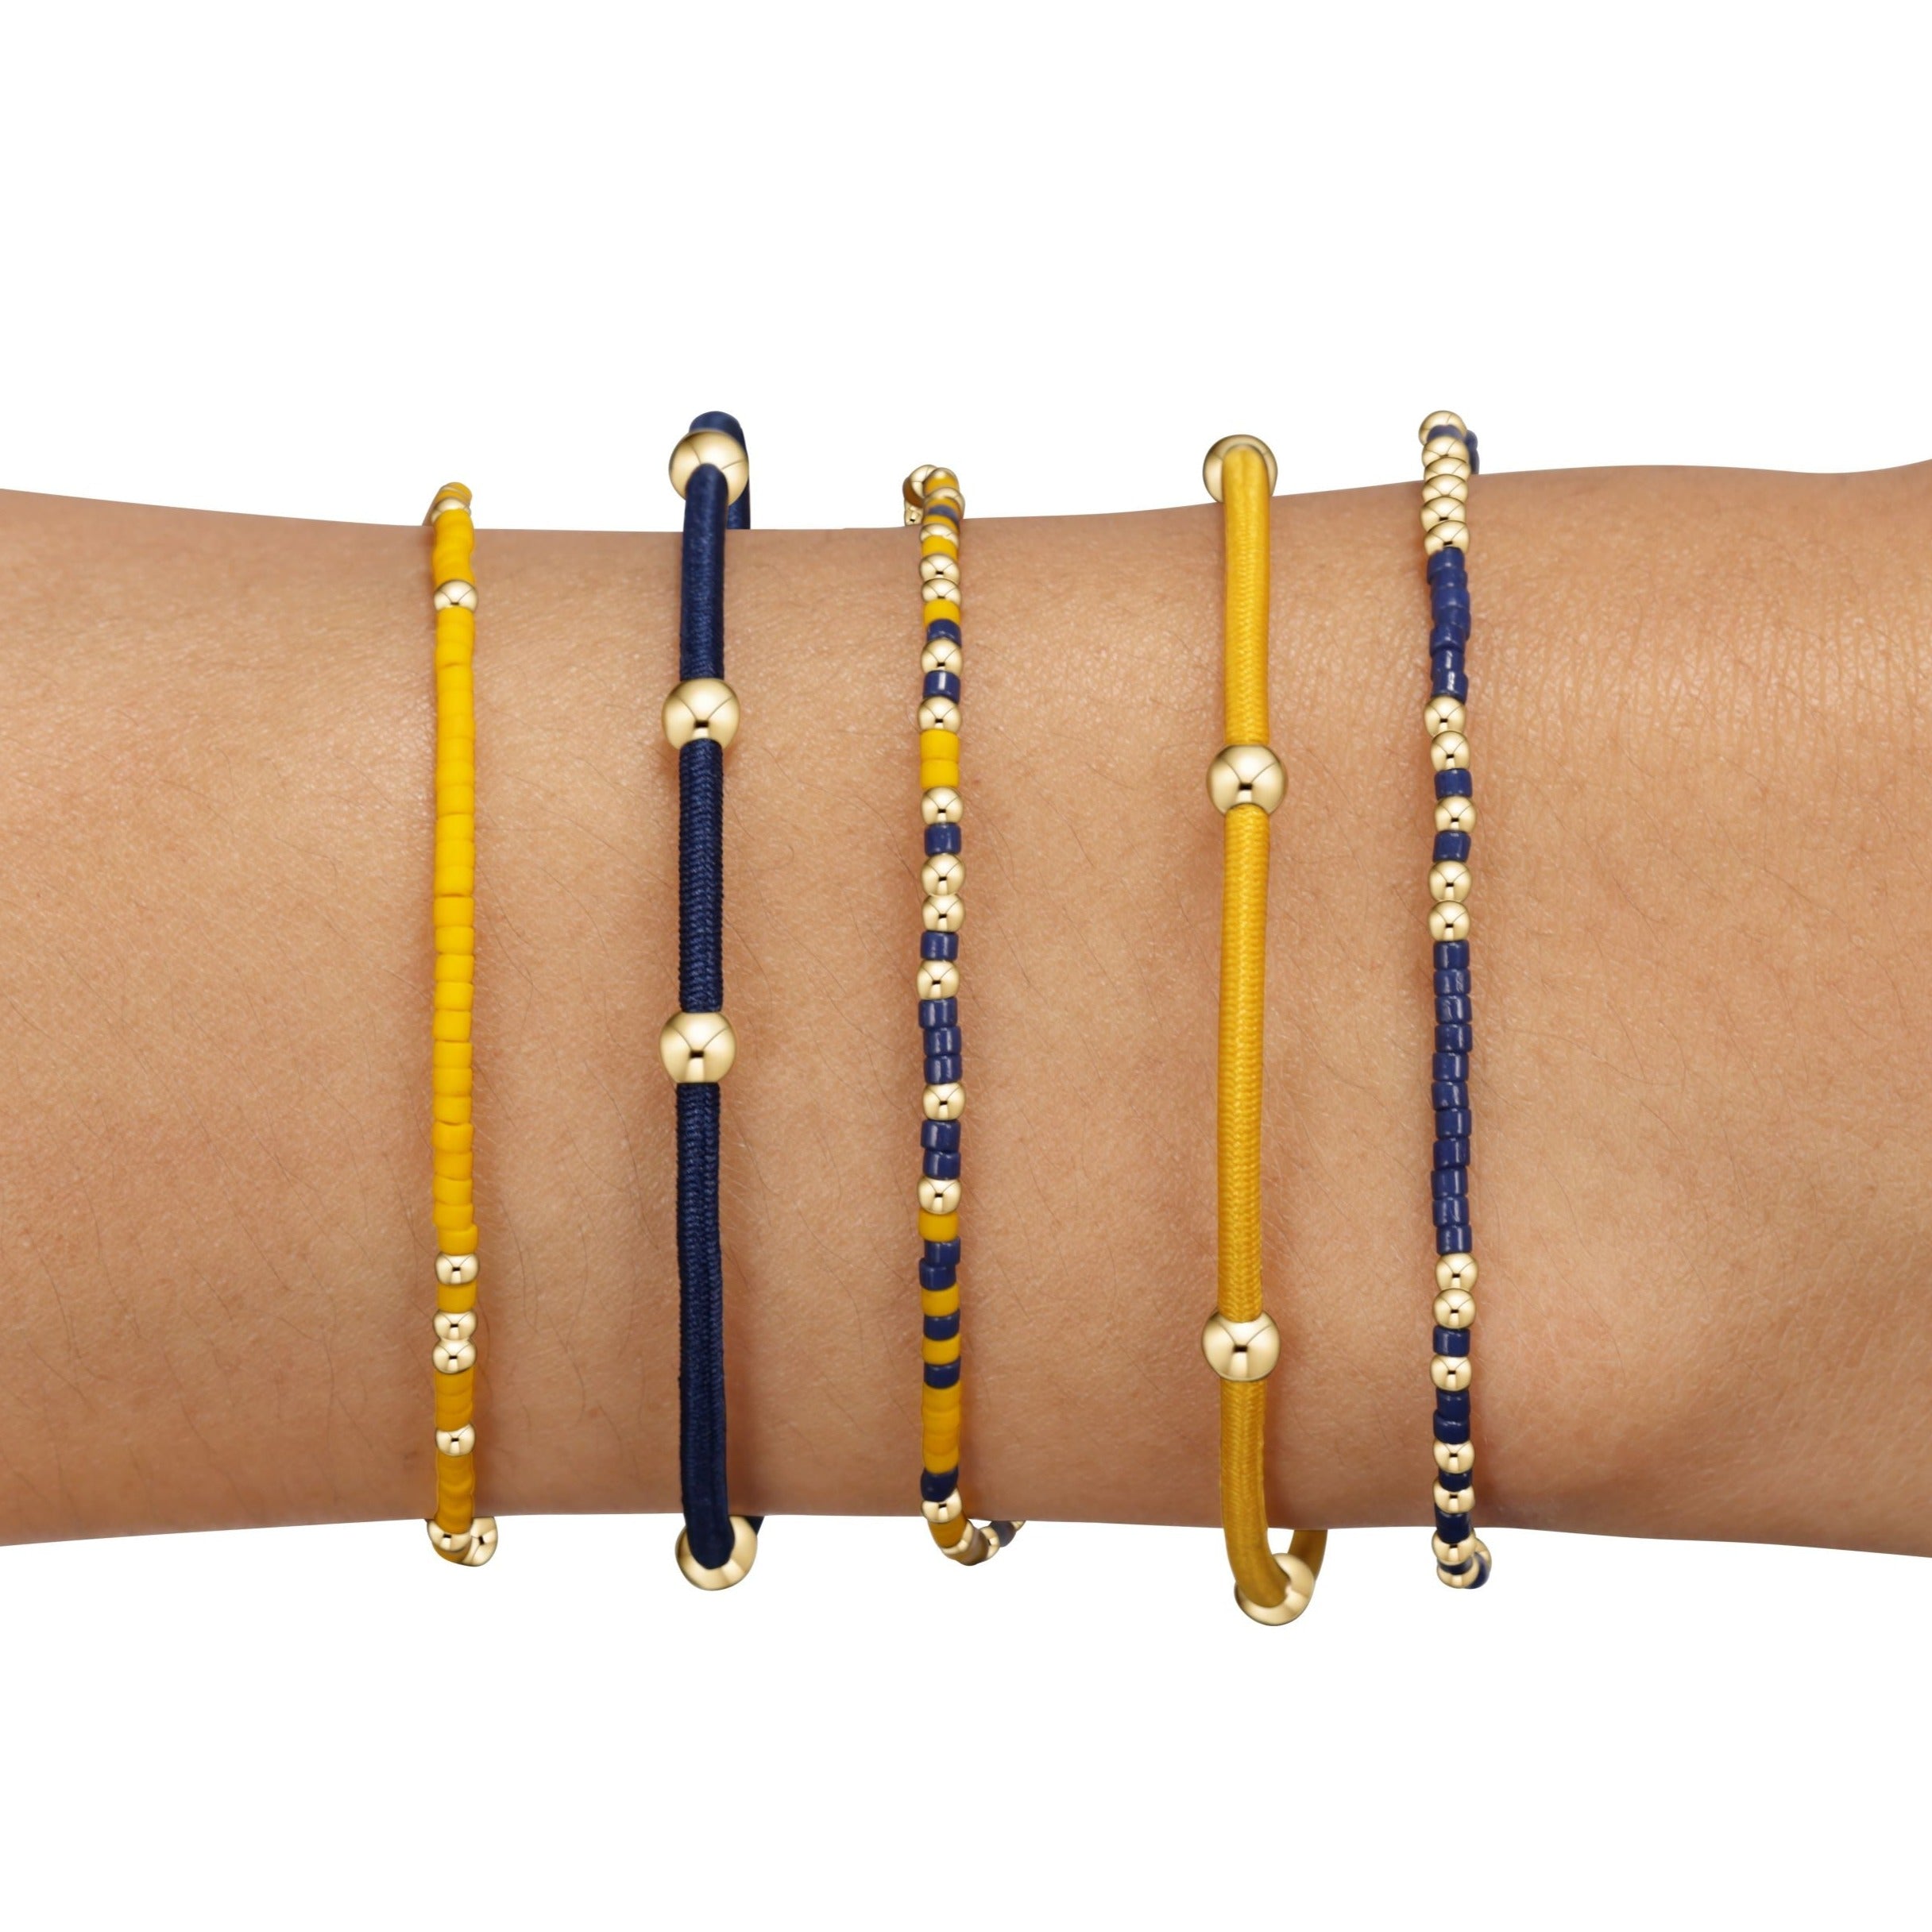 Red Zone Gameday Stack of 5 - Golden Yellow-Navy